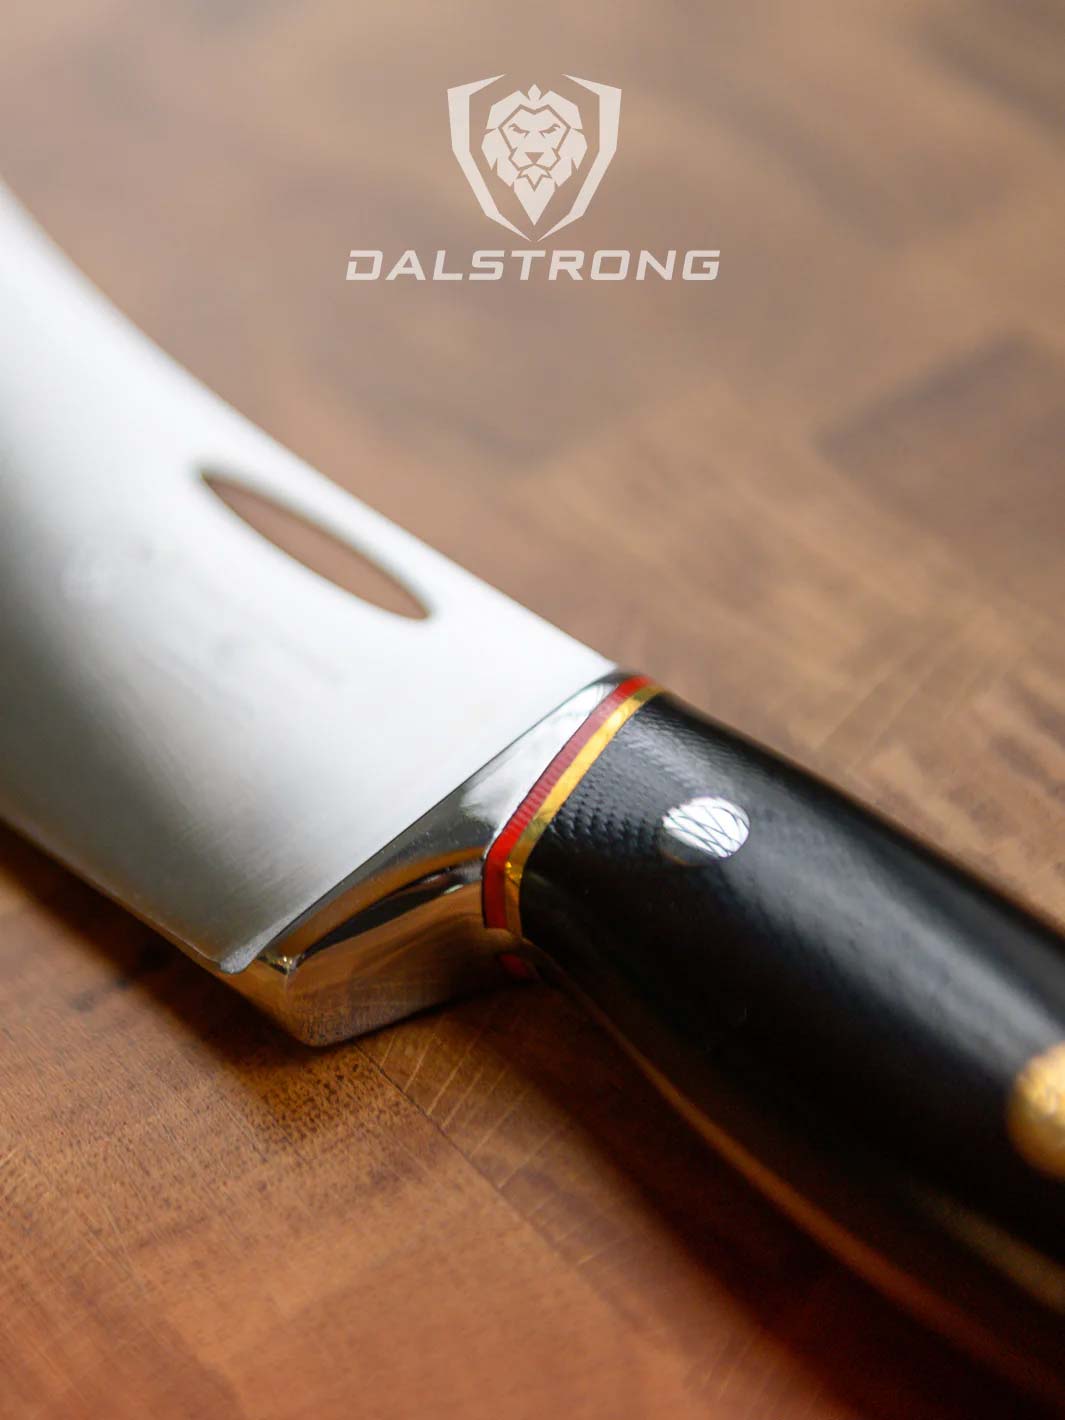 Chef-Cleaver Hybrid Knife 8" | The Crixus |  Centurion Series | Dalstrong ©